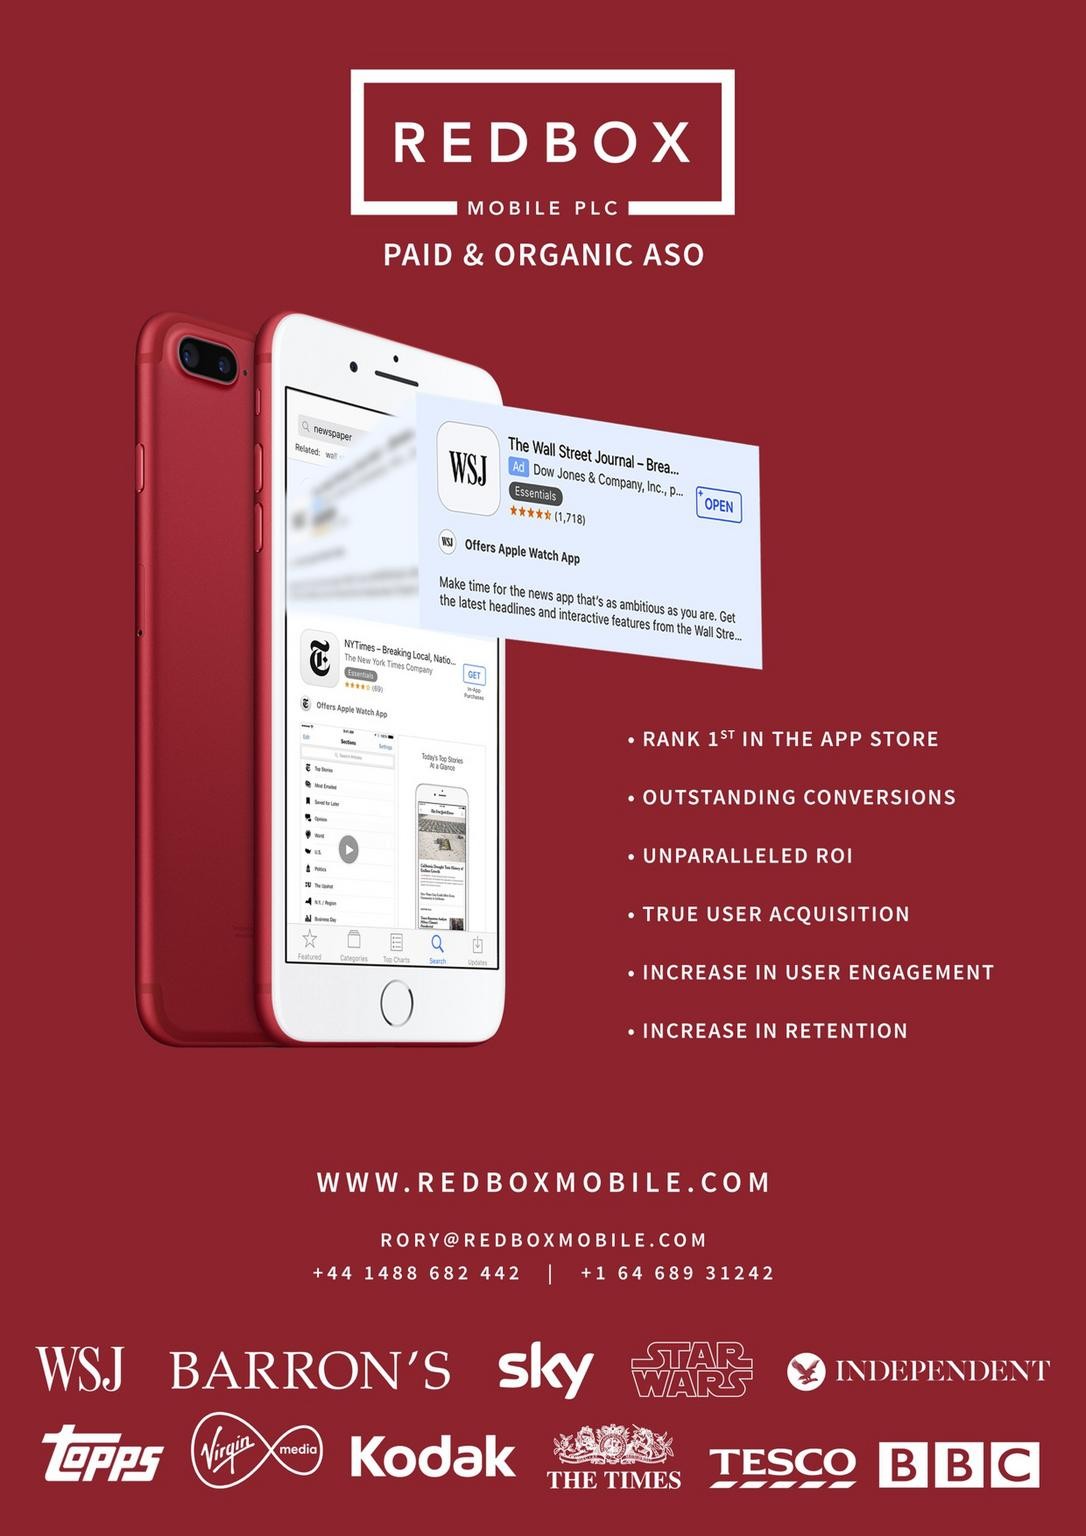 “Paid and Organic App Store Optimization (ASO) from Redbox Mobile PLC”